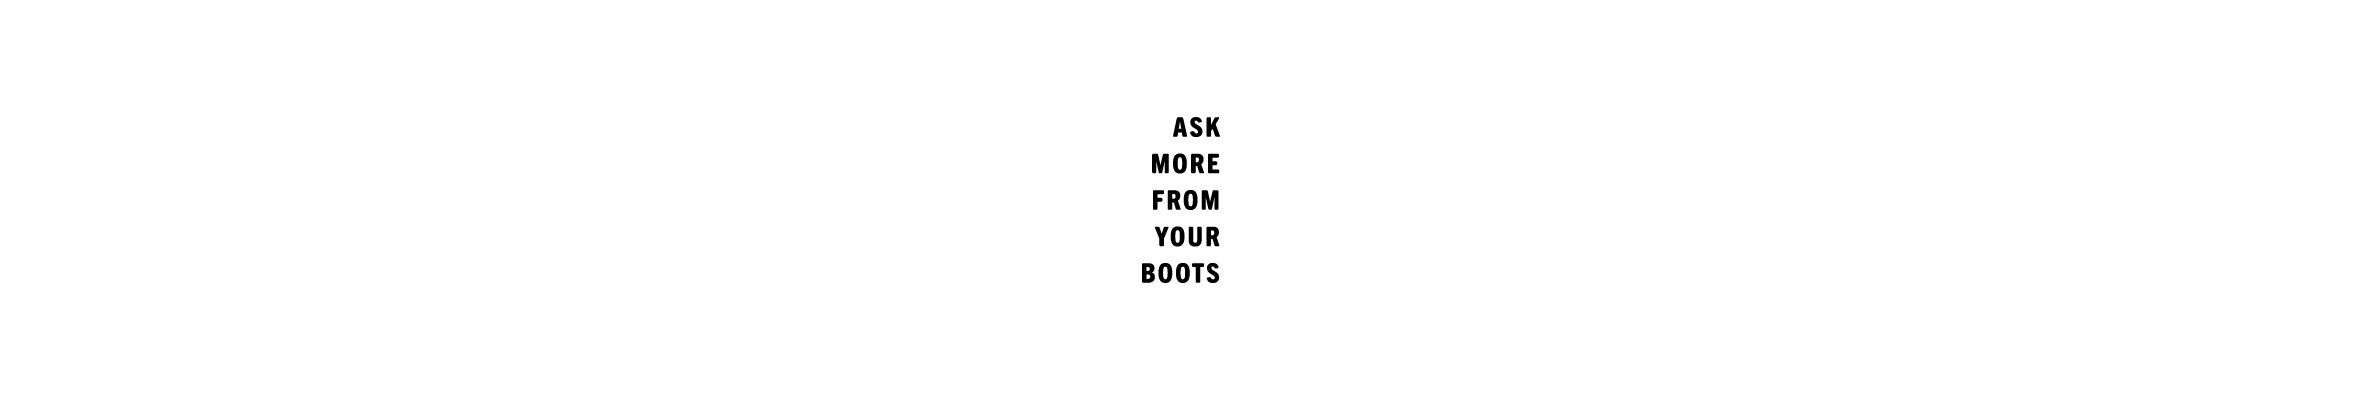 ASK MORE FROM YOUR BOOTS